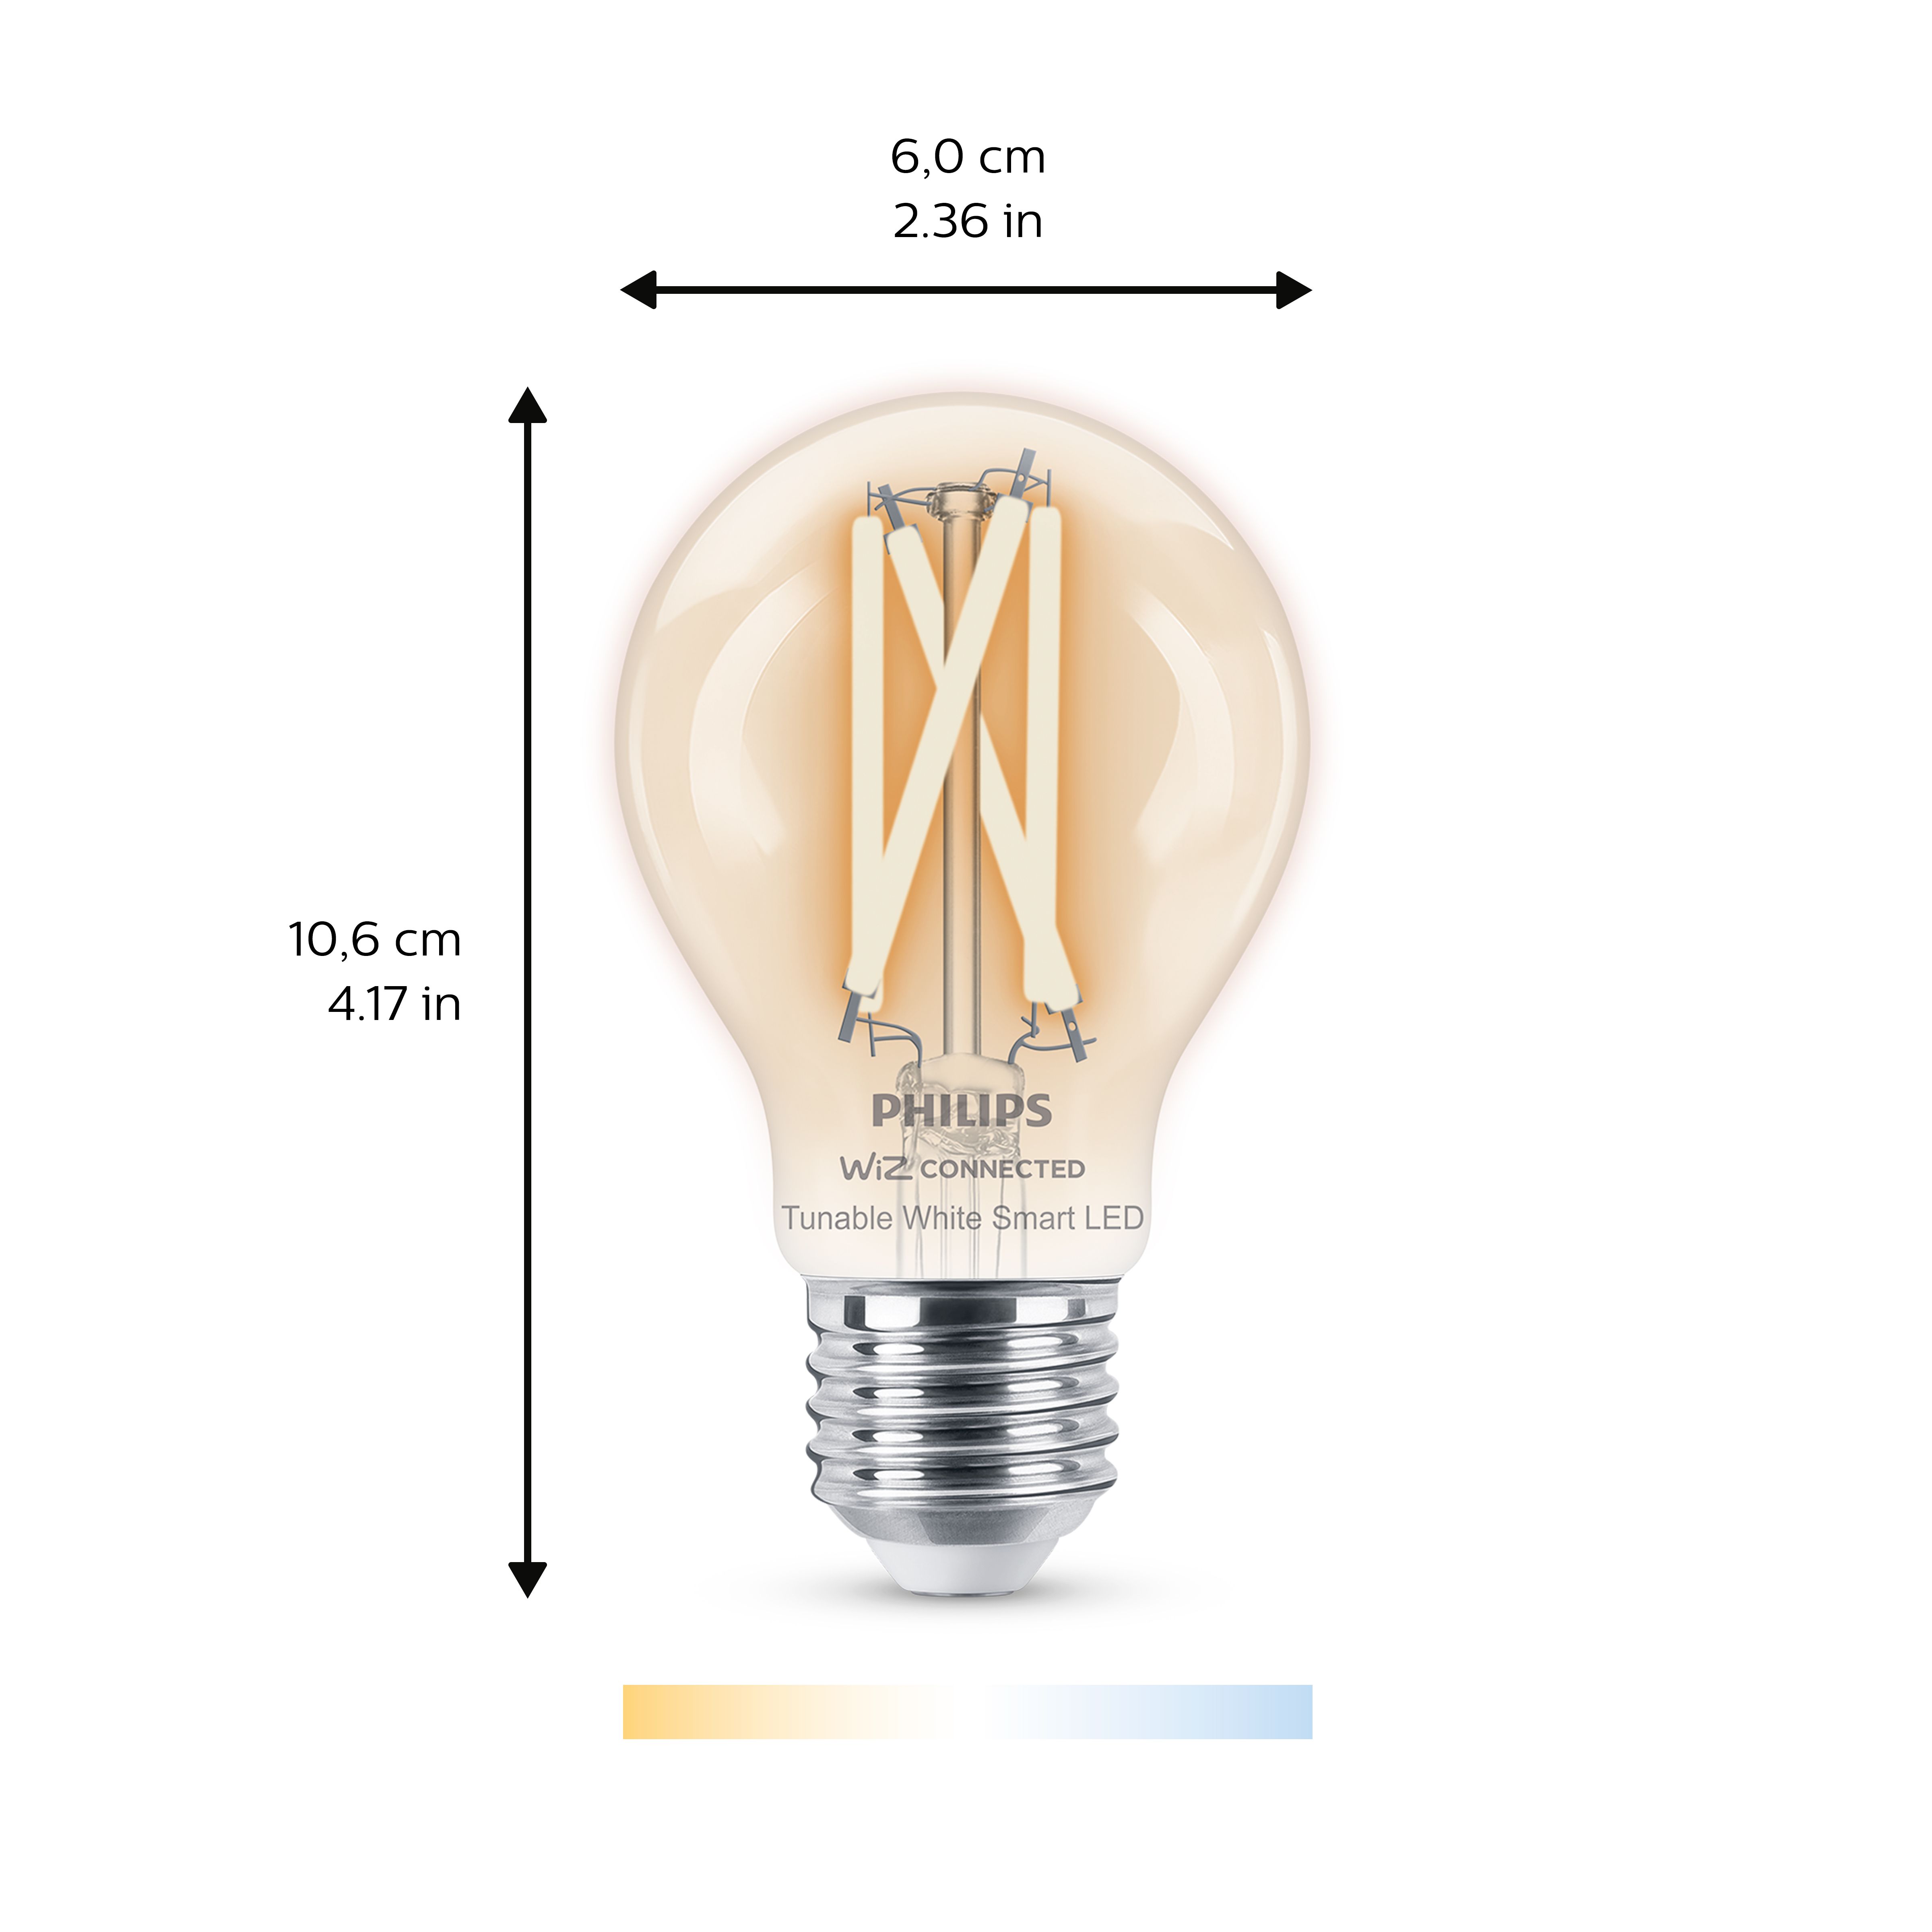 Philips WiZ E27 60W LED Cool white & warm white A60 Non-dimmable Light bulb Pack of 2